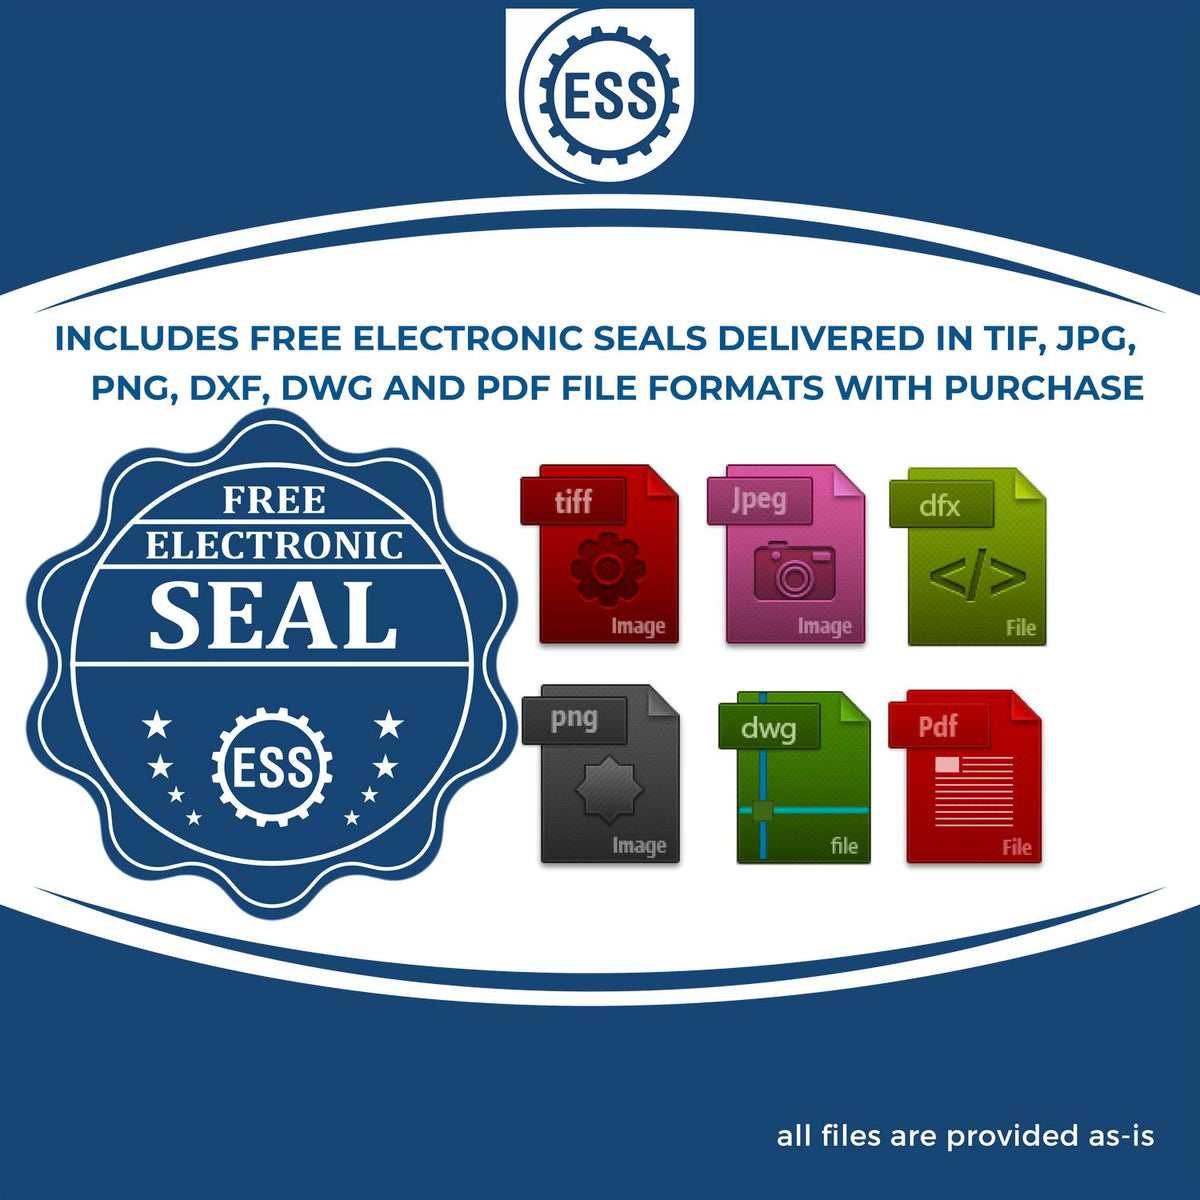 An infographic for the free electronic seal for the Self-Inking Rectangular Colorado Notary Stamp illustrating the different file type icons such as DXF, DWG, TIF, JPG and PNG.